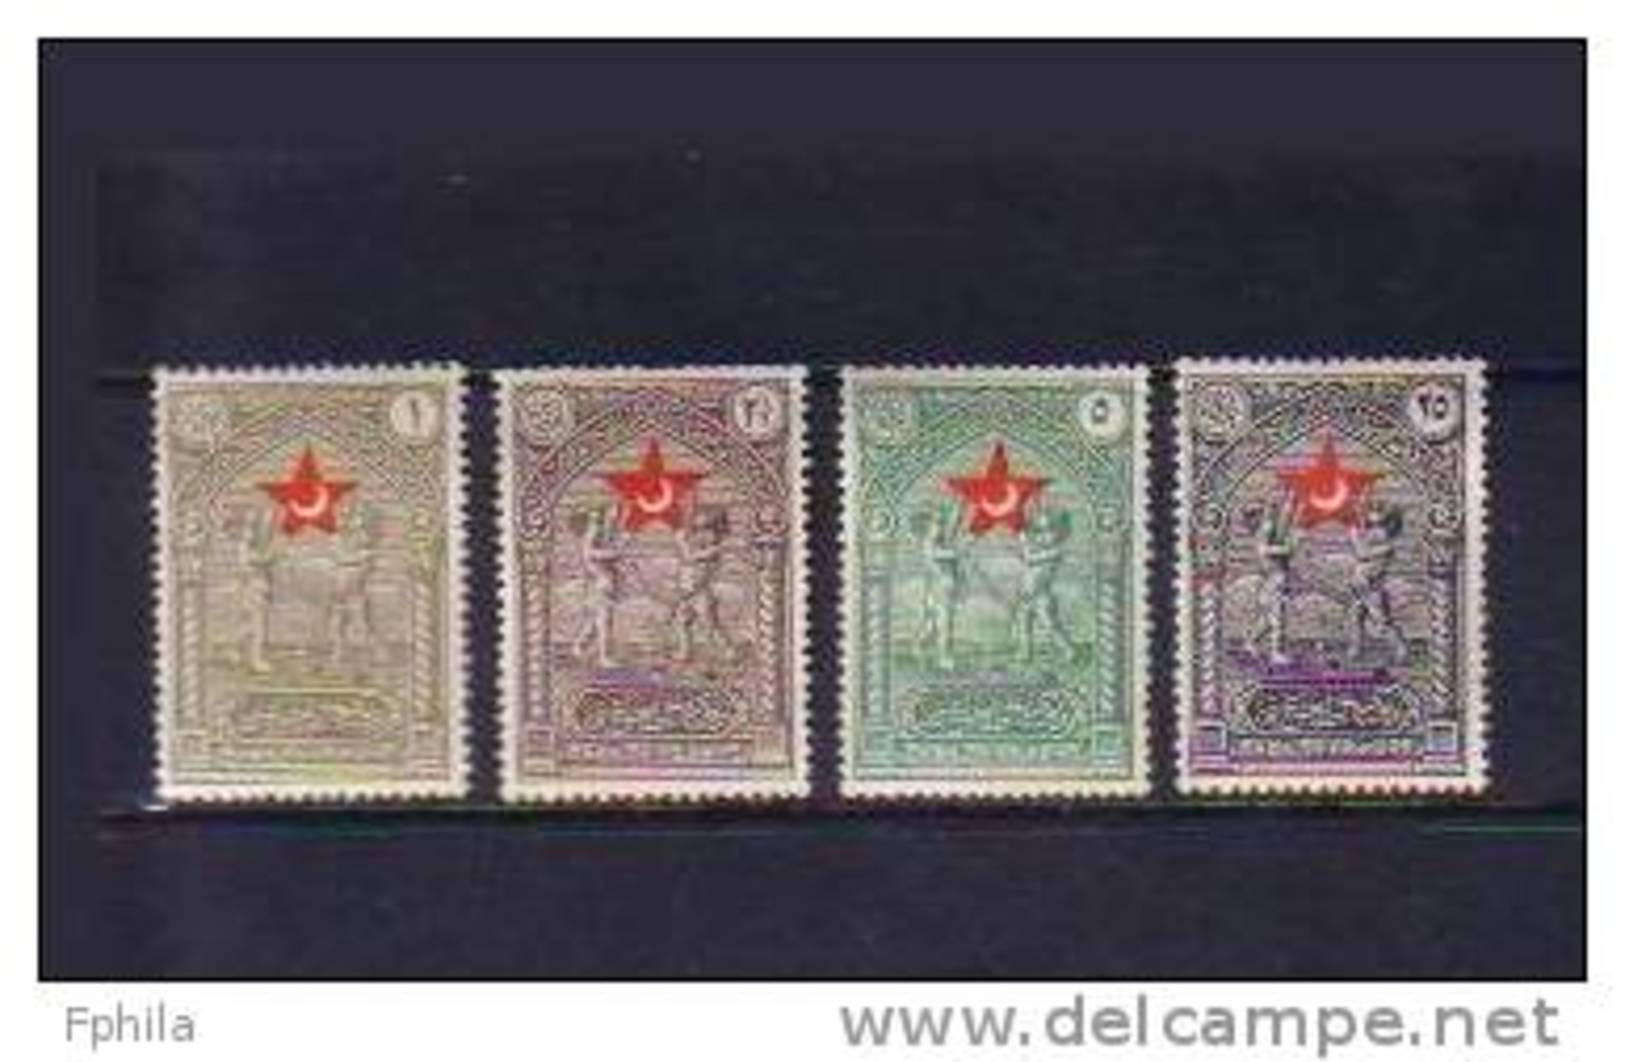 1928 TURKEY STAMPS IN AID OF THE TURKISH SOCIETY FOR THE PROTECTION OF CHILDREN MINT WITHOUT GUM - Wohlfahrtsmarken